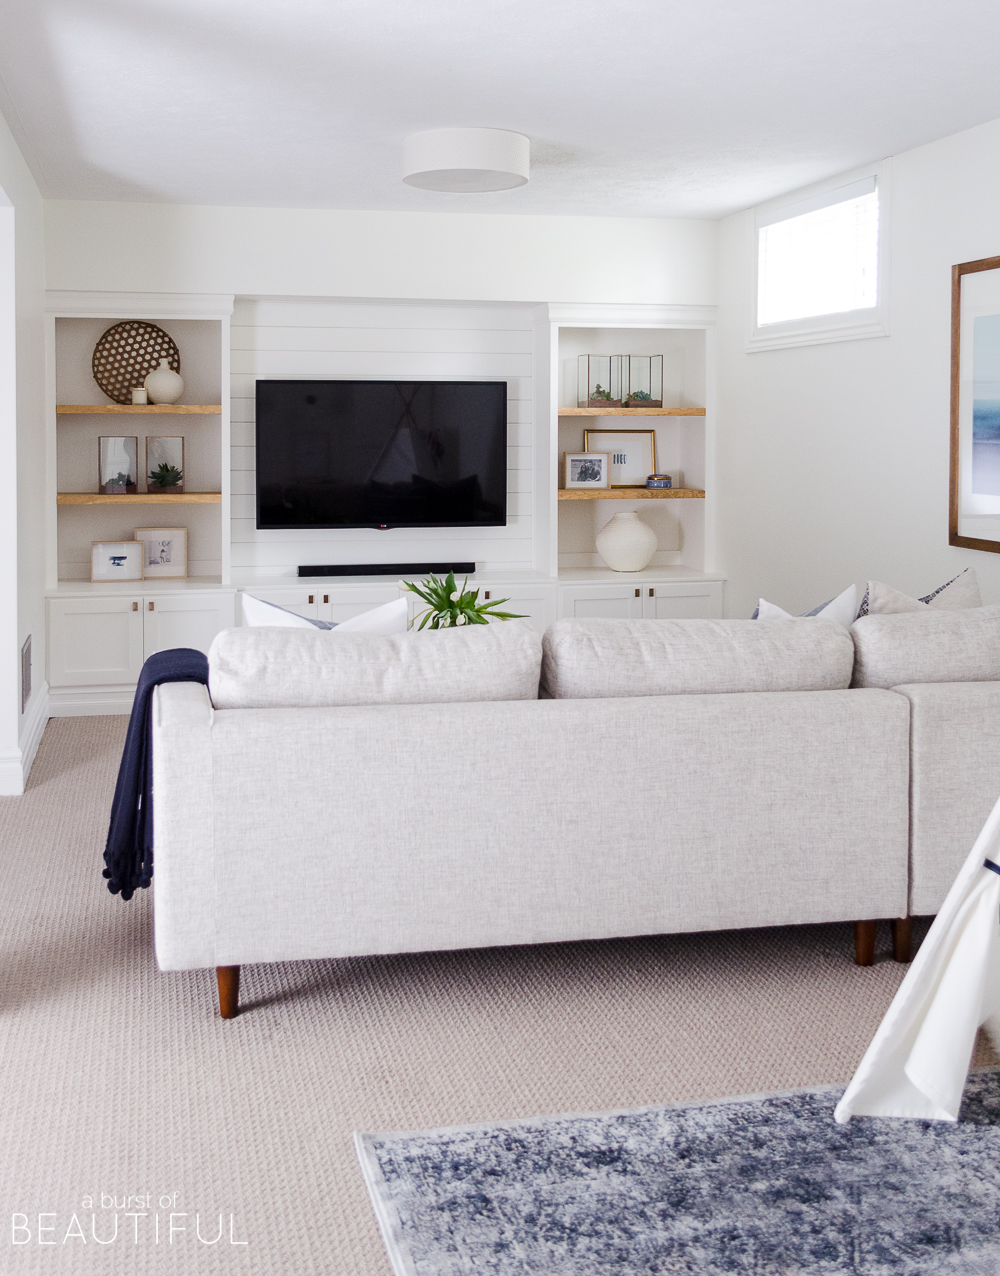 A bright family room features the perfect mix of traditional and modern design elements, including a mid-century modern sofa, open shelving and shiplap walls.